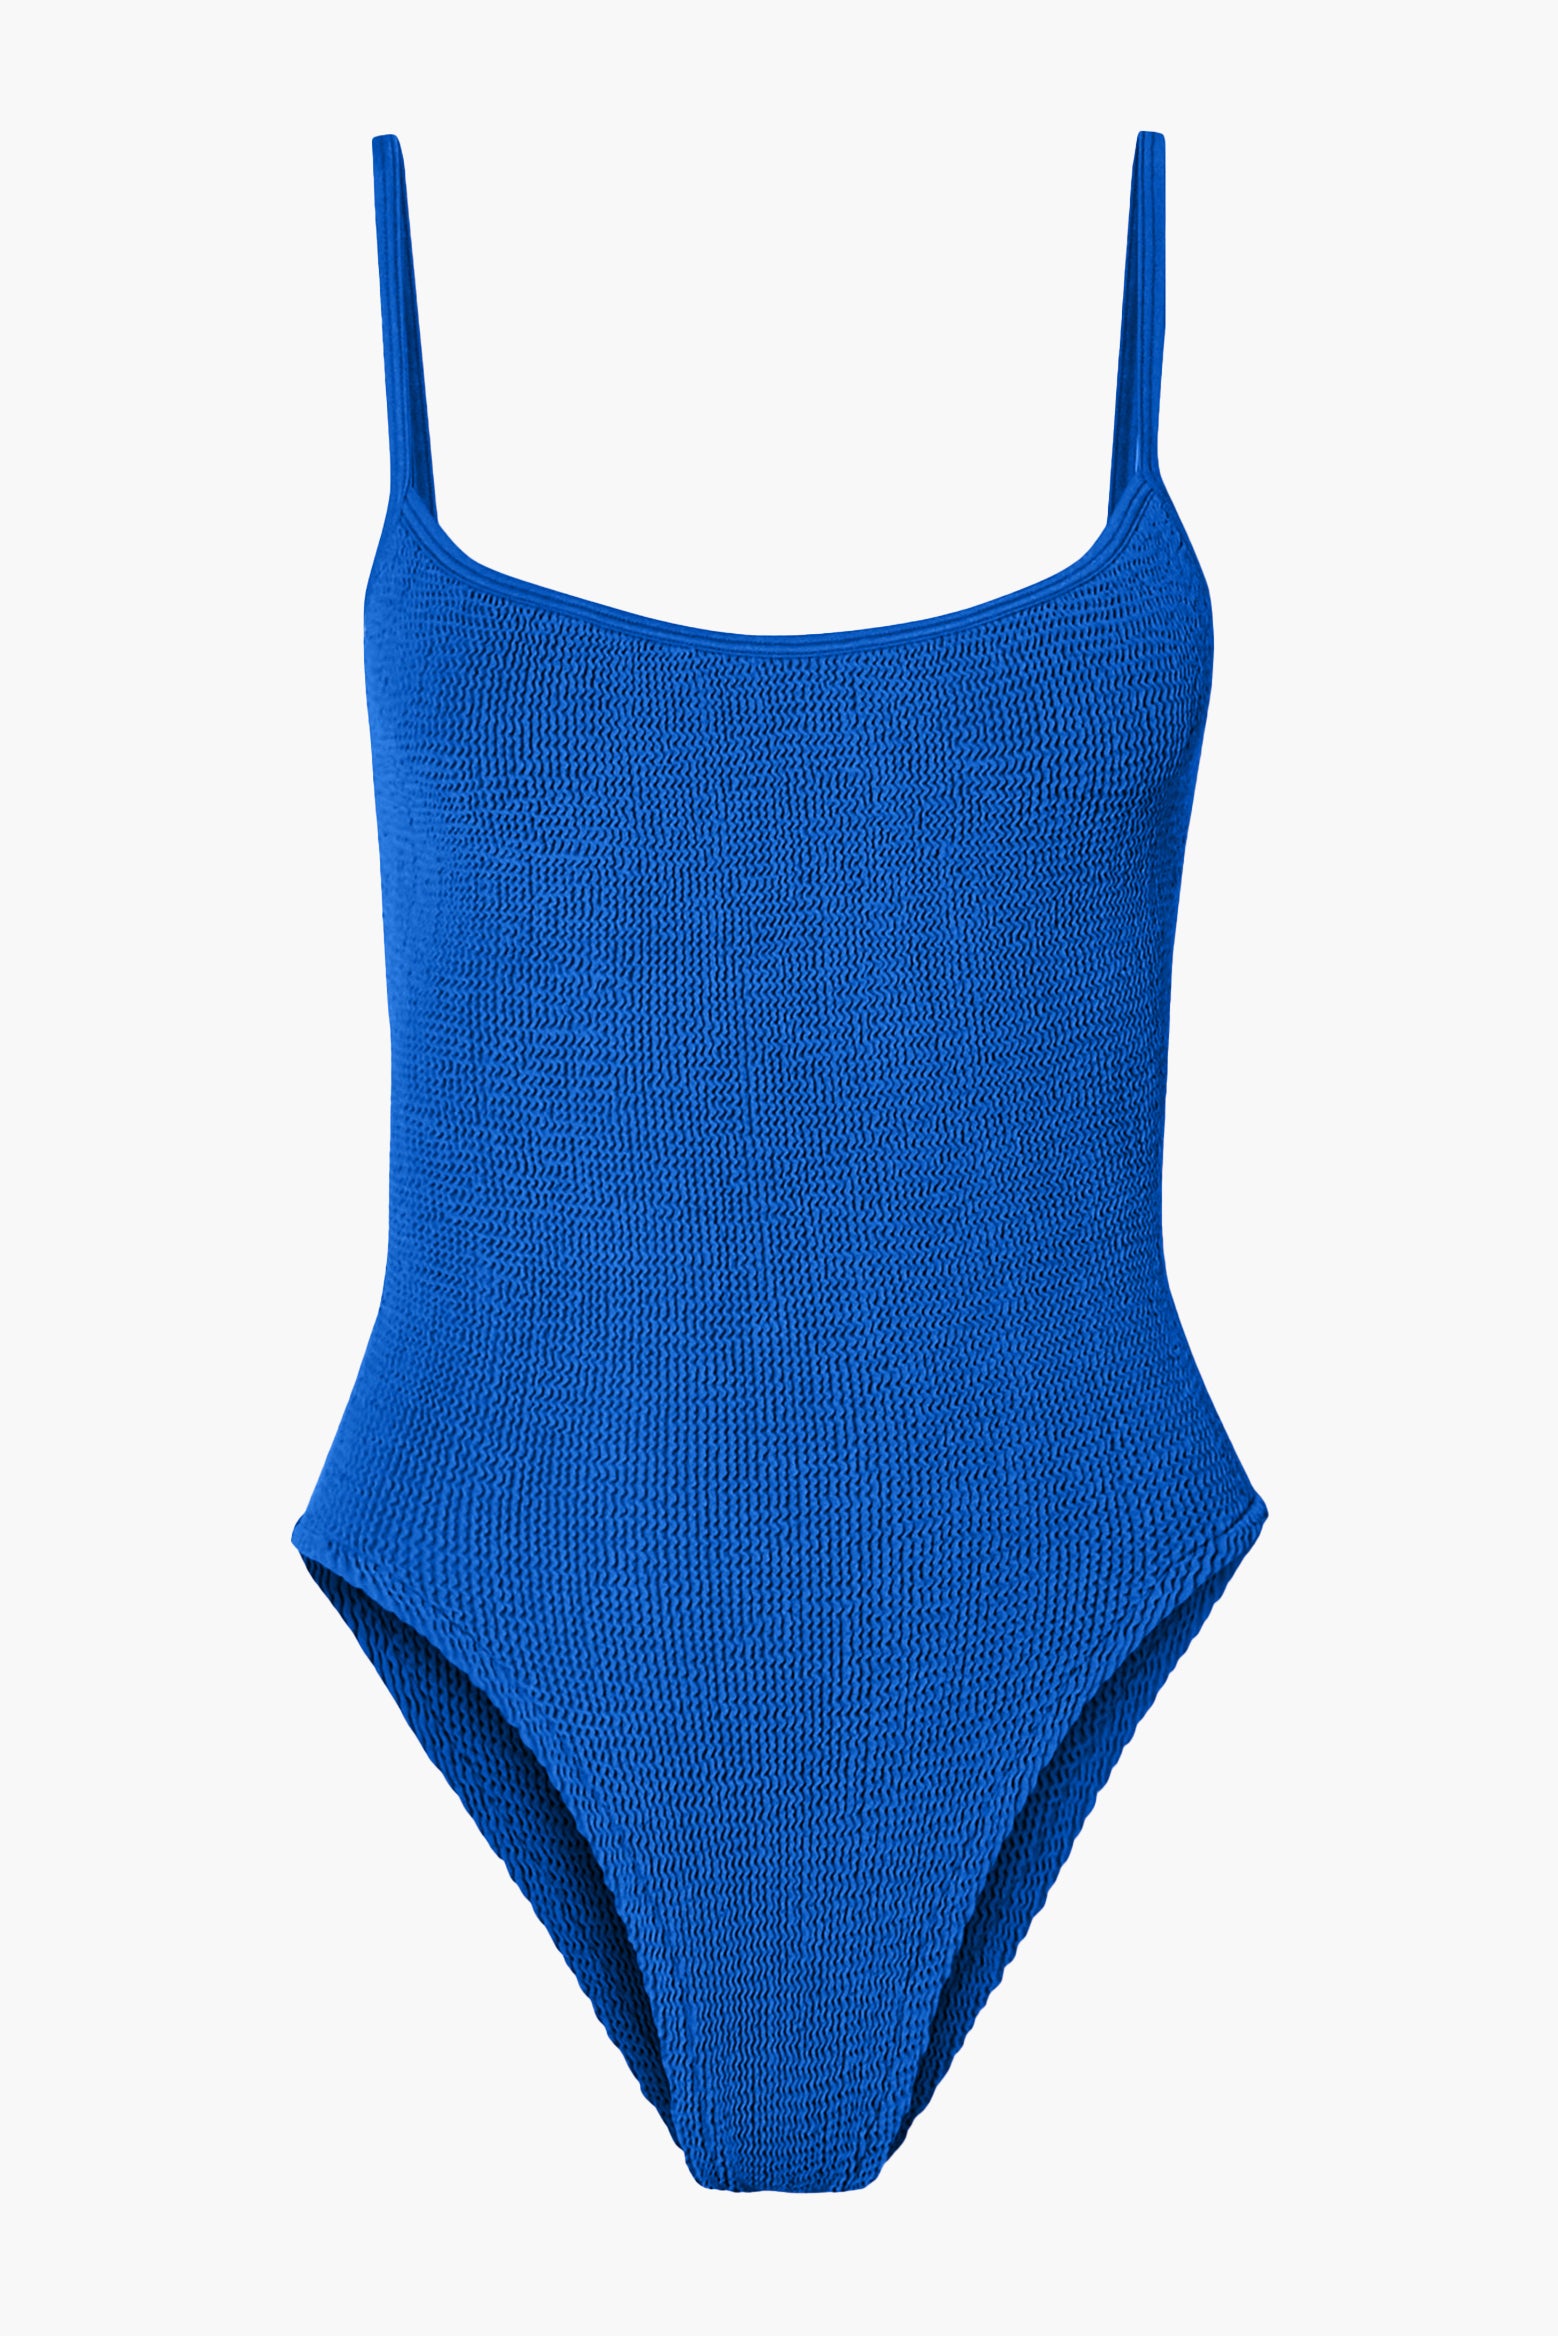 Hunza G Pamela Swim in Royal Blue available at The New Trend Australia